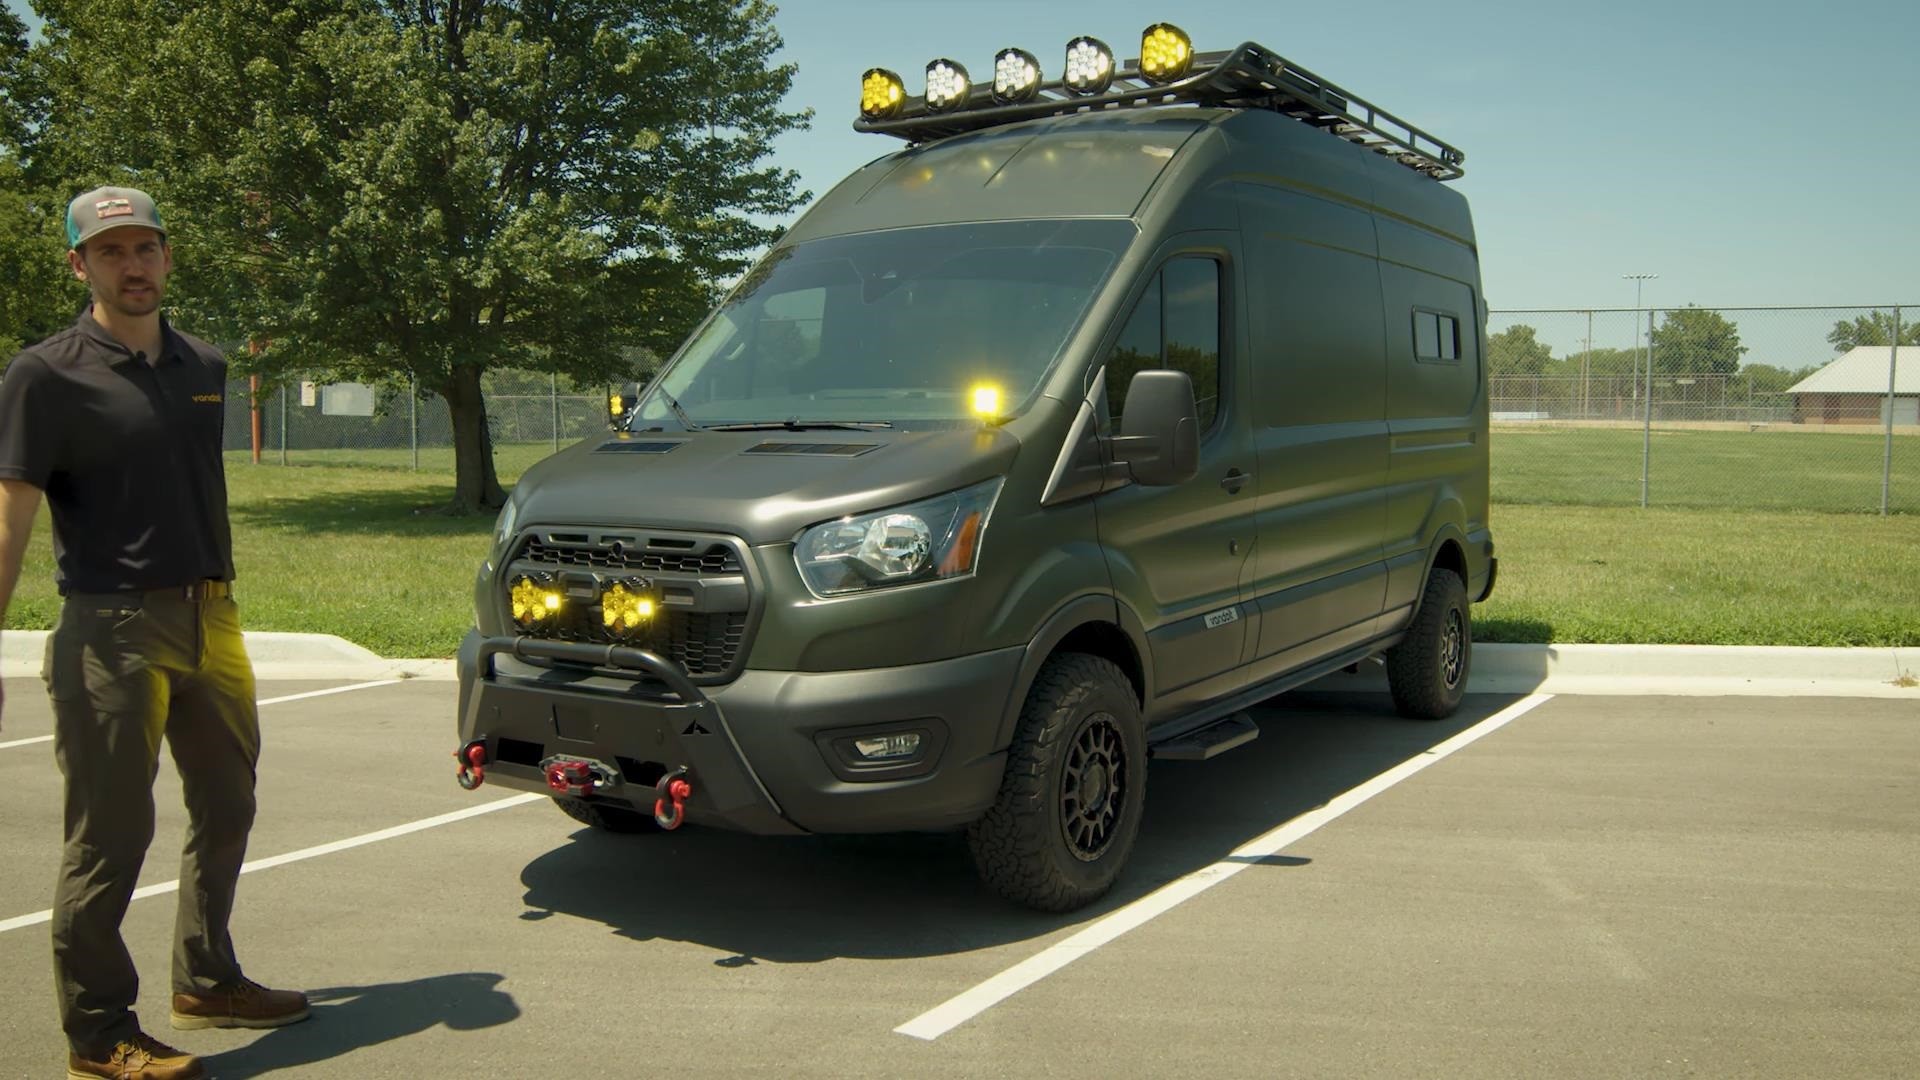 2023 Ford Transit Trail Is Off-Road, Off-Grid Vehicle For Van Life